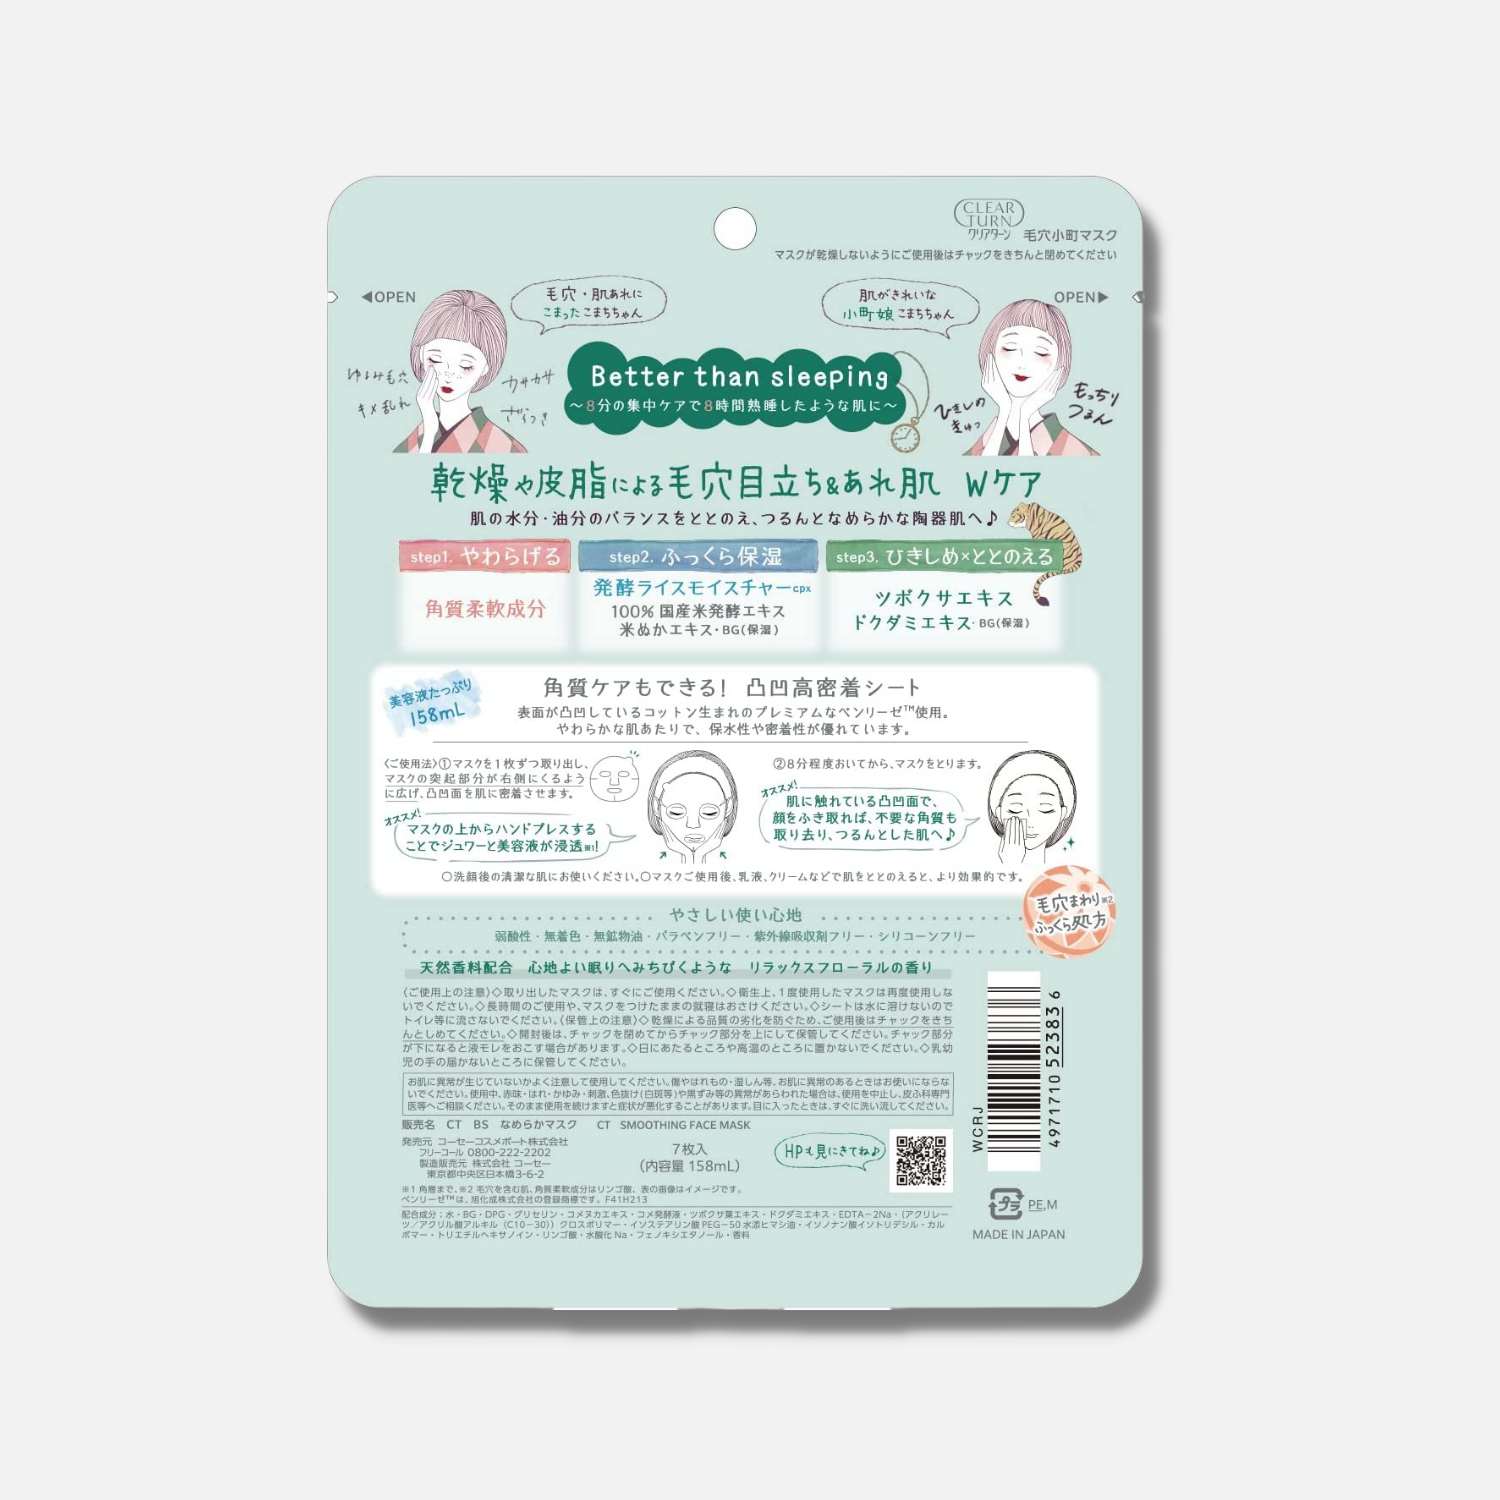 Kose Clear Turn Rice Extract and Cica Moisturizing Skincare Mask 7 Sheets - Buy Me Japan